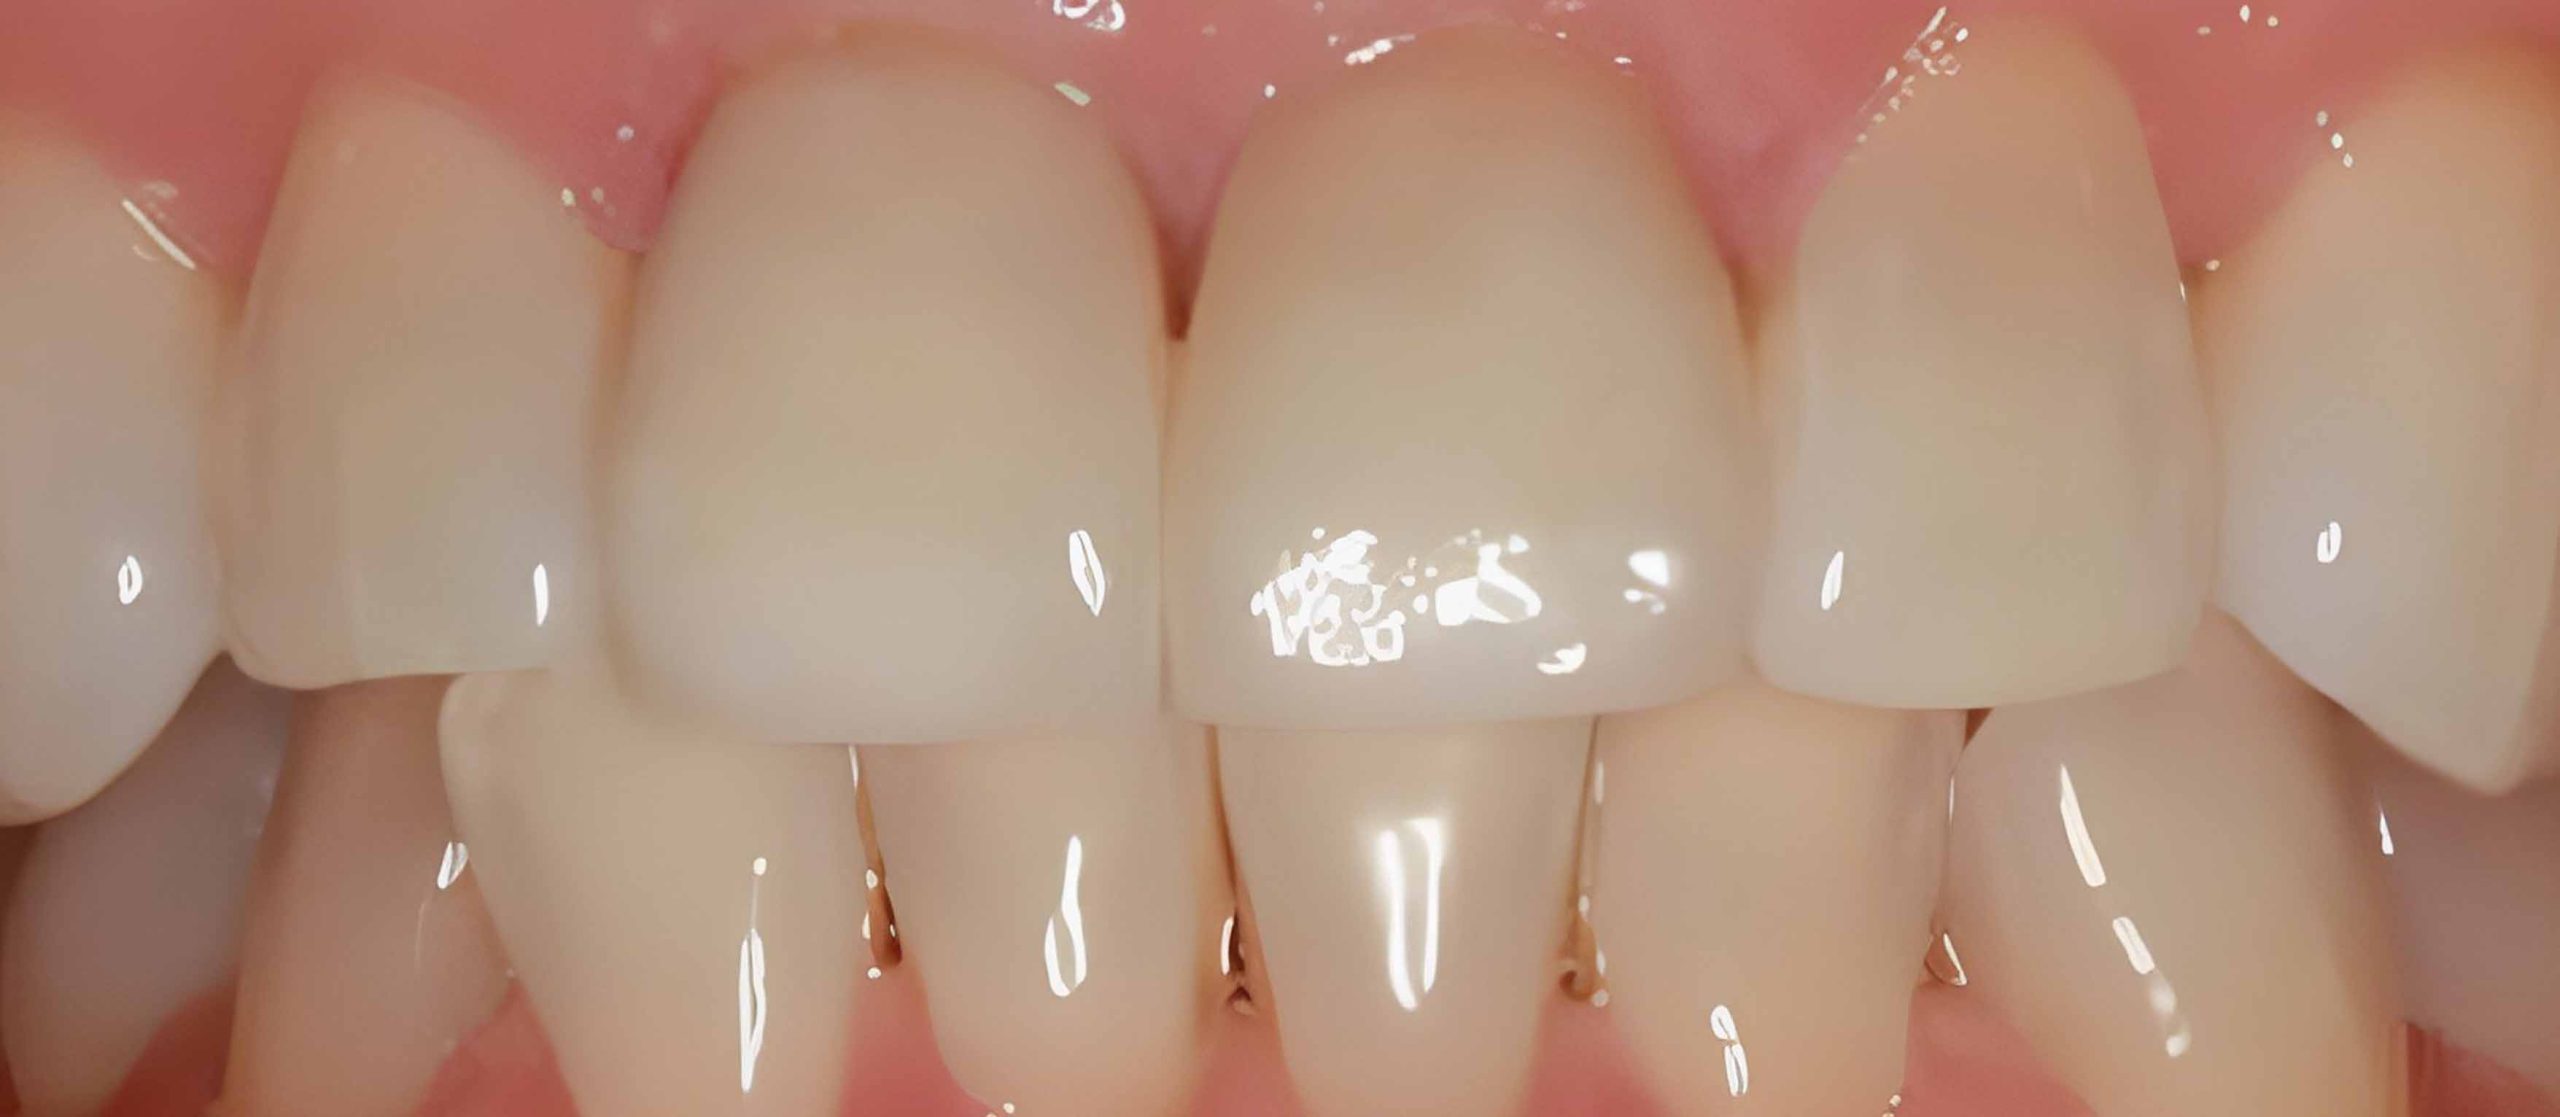 Before & After Whitening Services